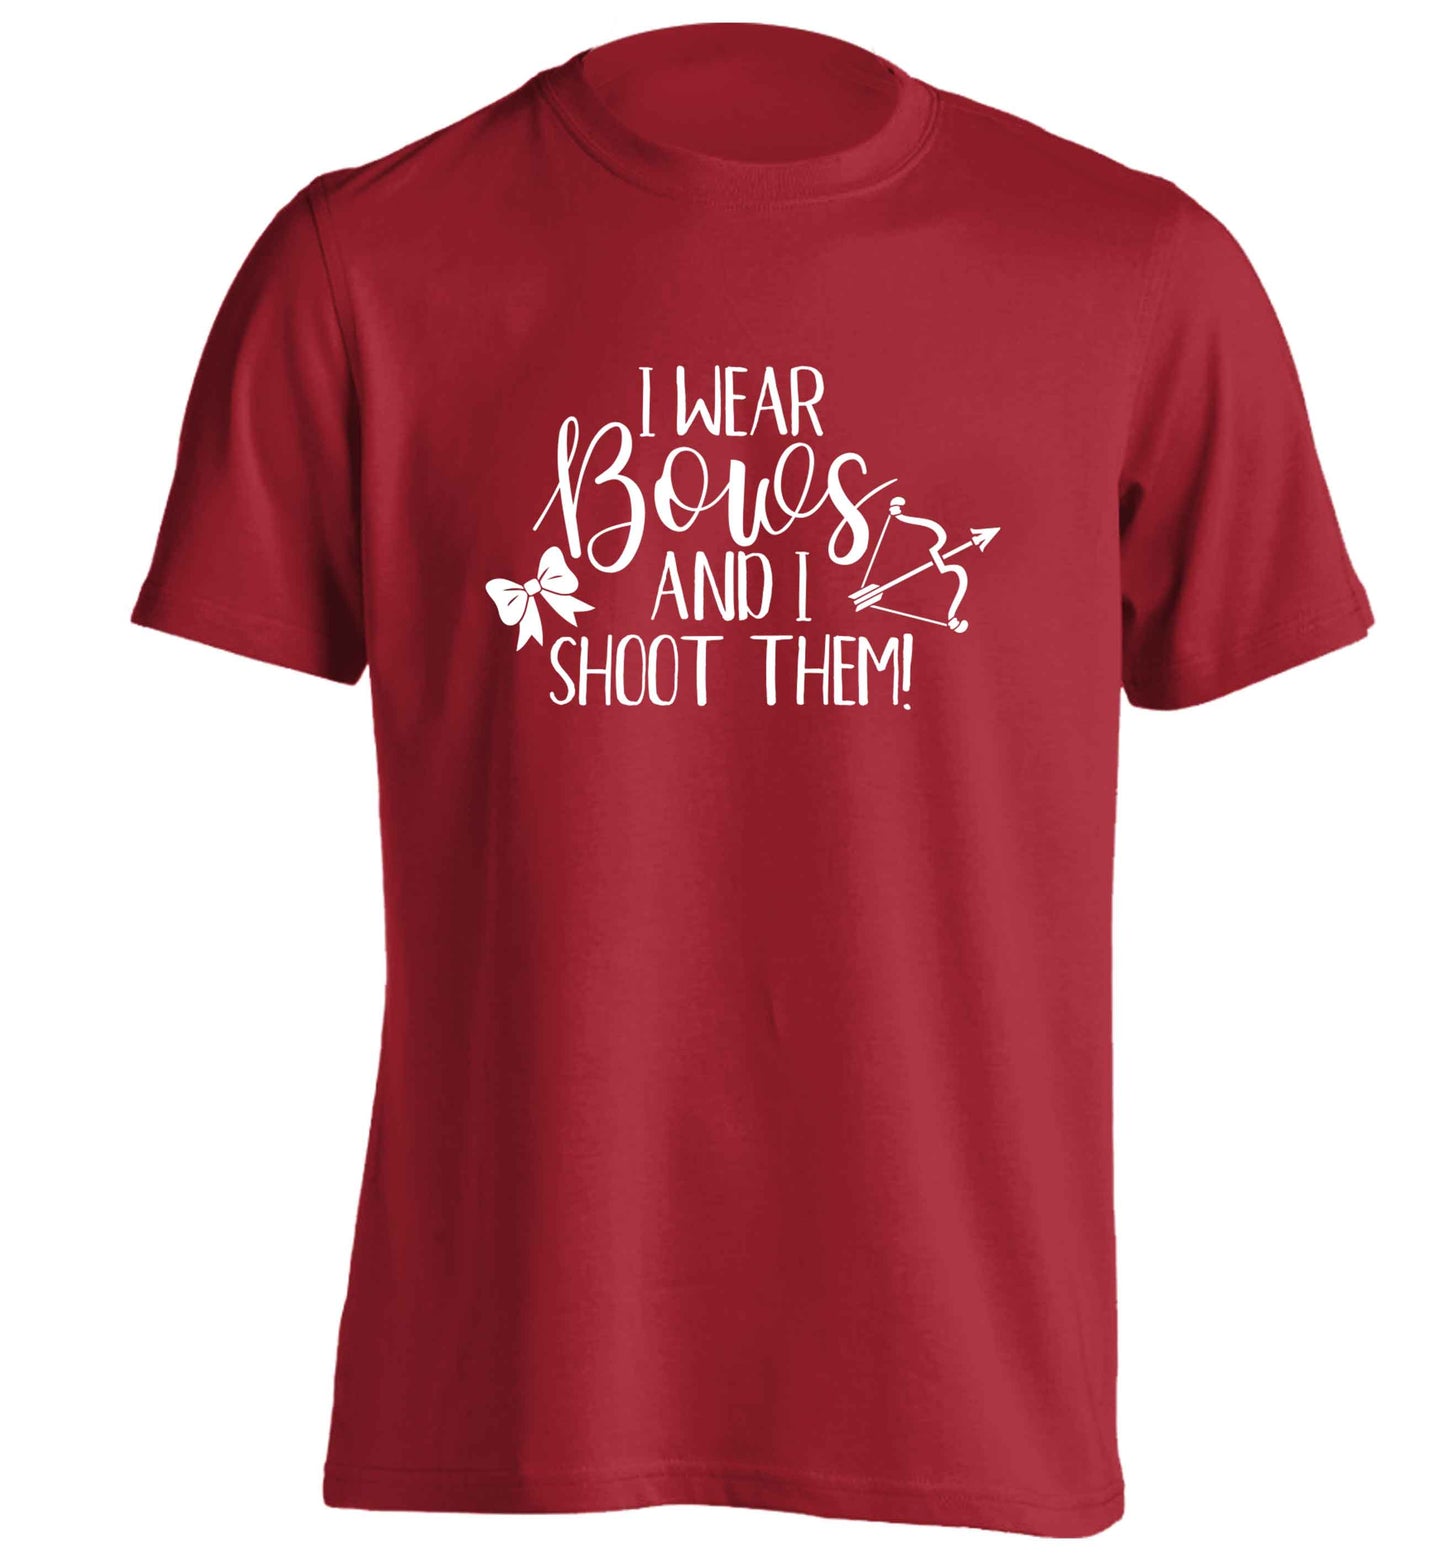 I wear bows and I shoot them adults unisex red Tshirt 2XL